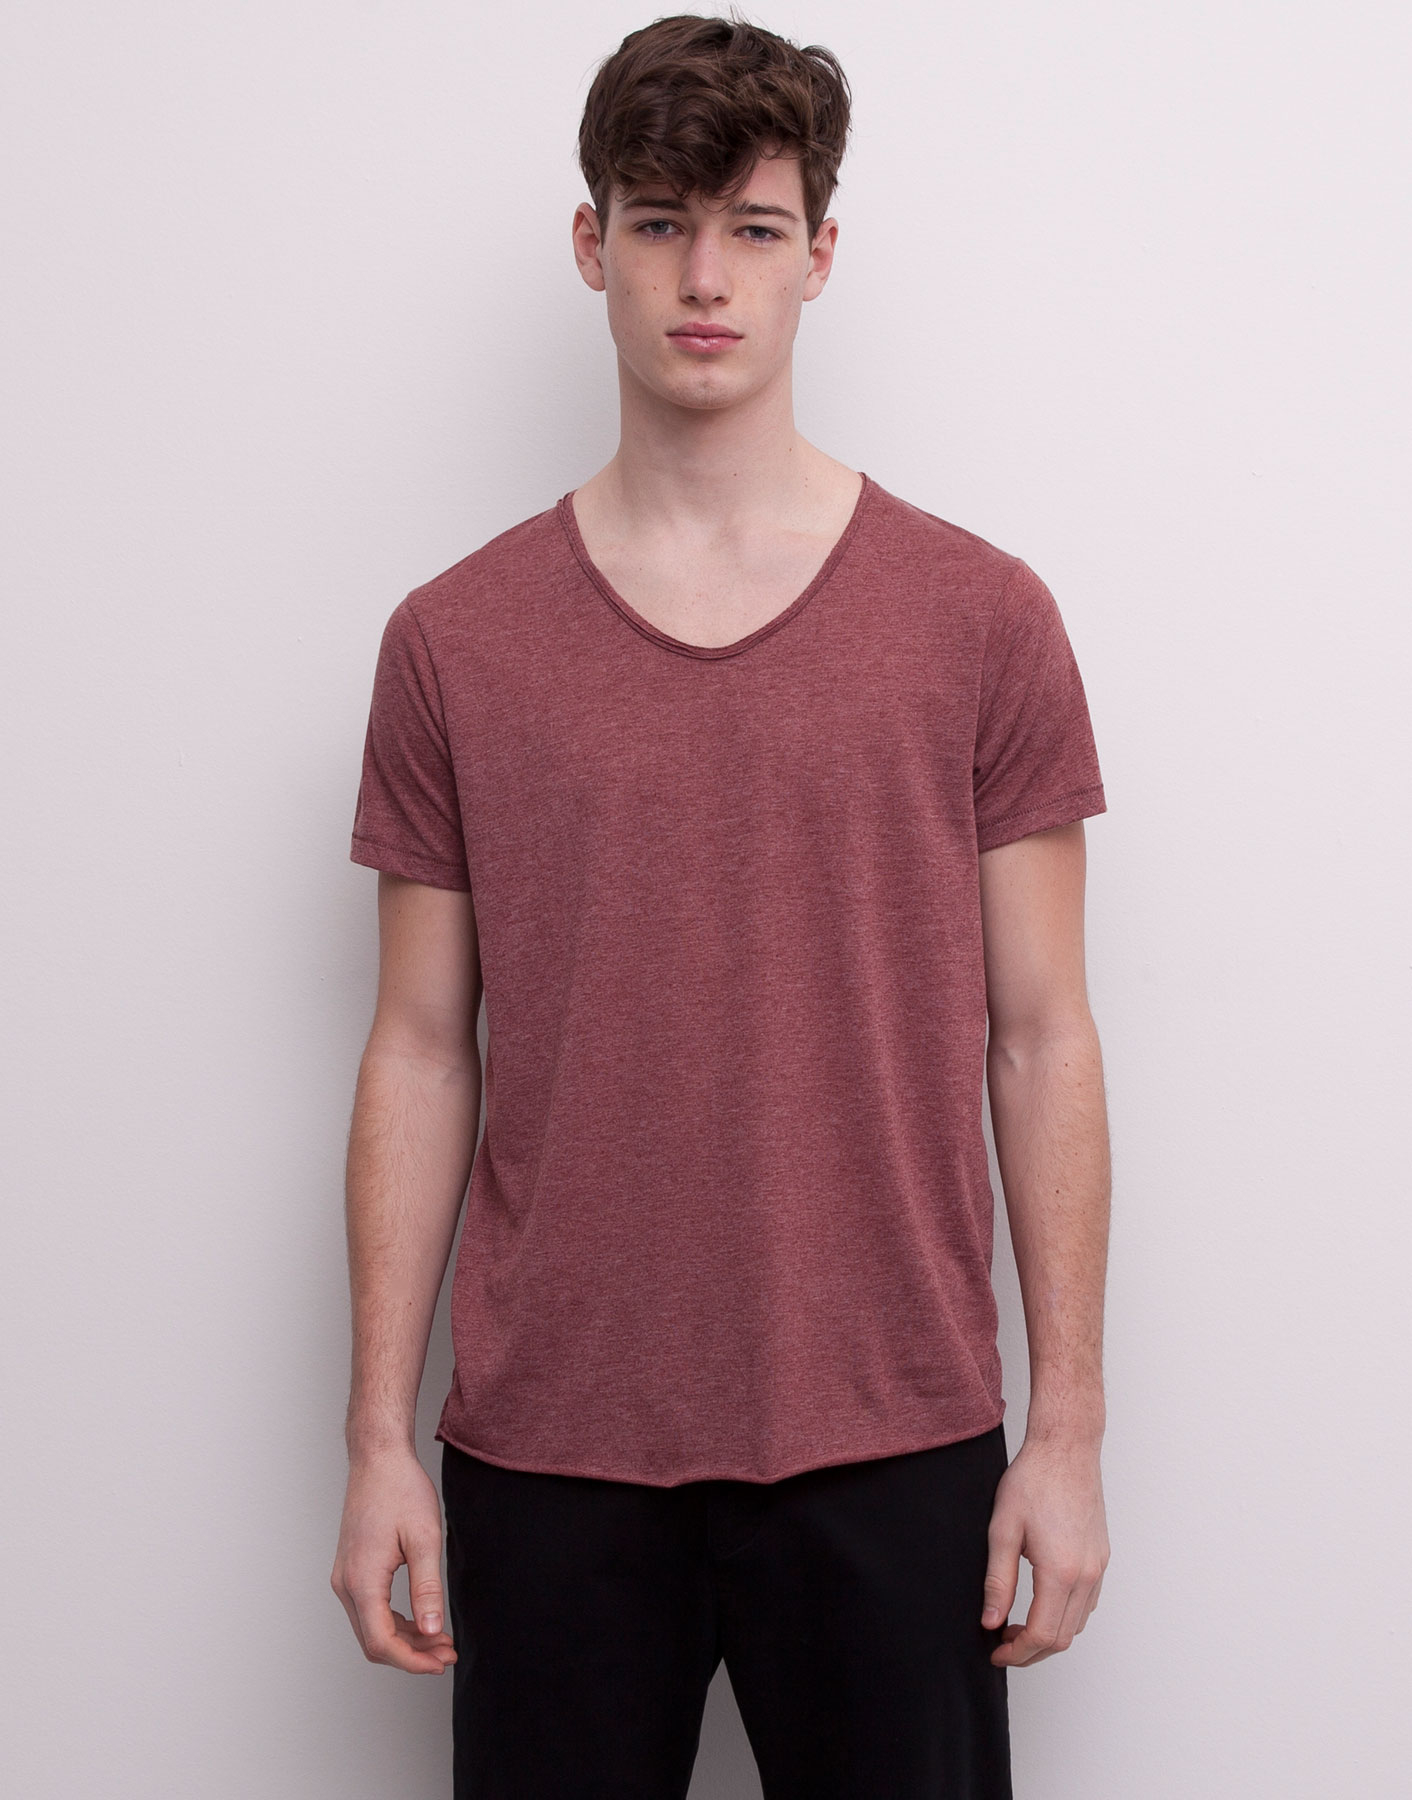 Pull and bear v neck t shirt auction